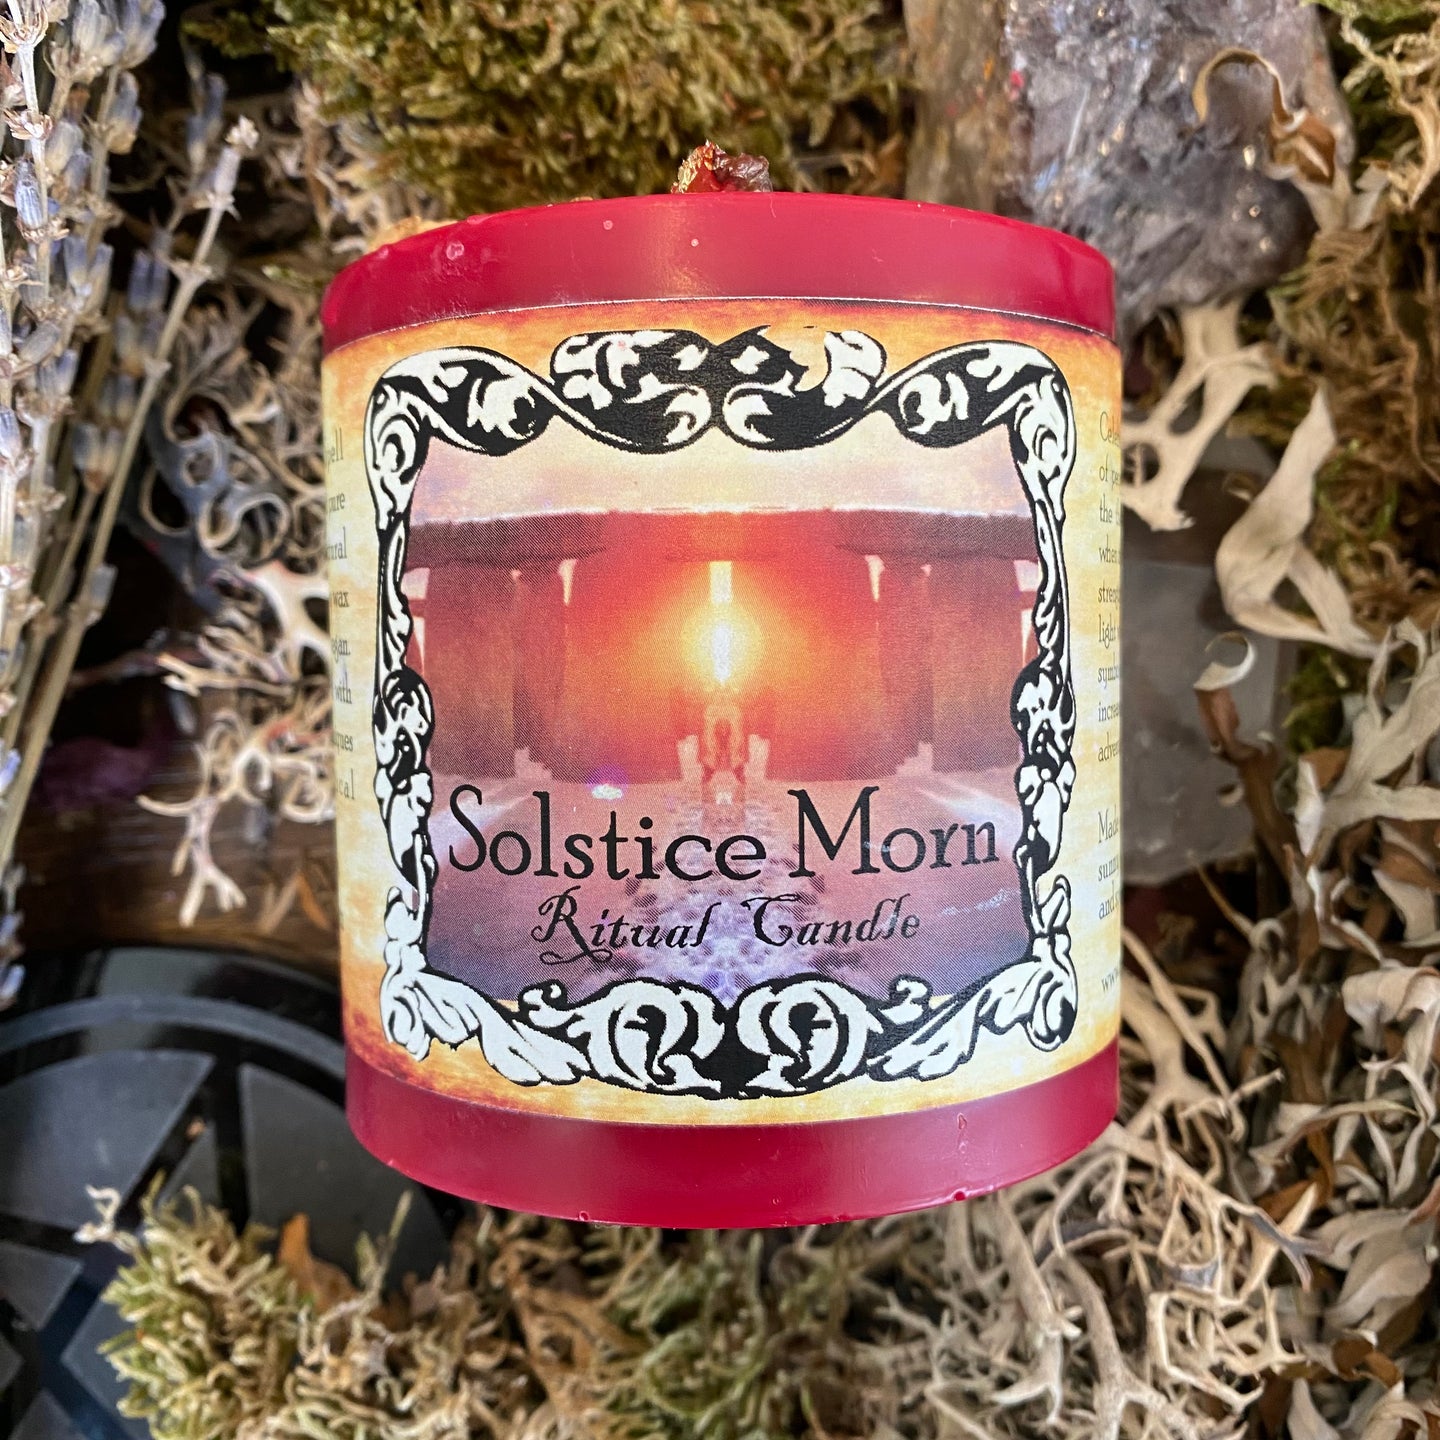 Solstice Morn Yule Blessing Chunky Pillar Candle